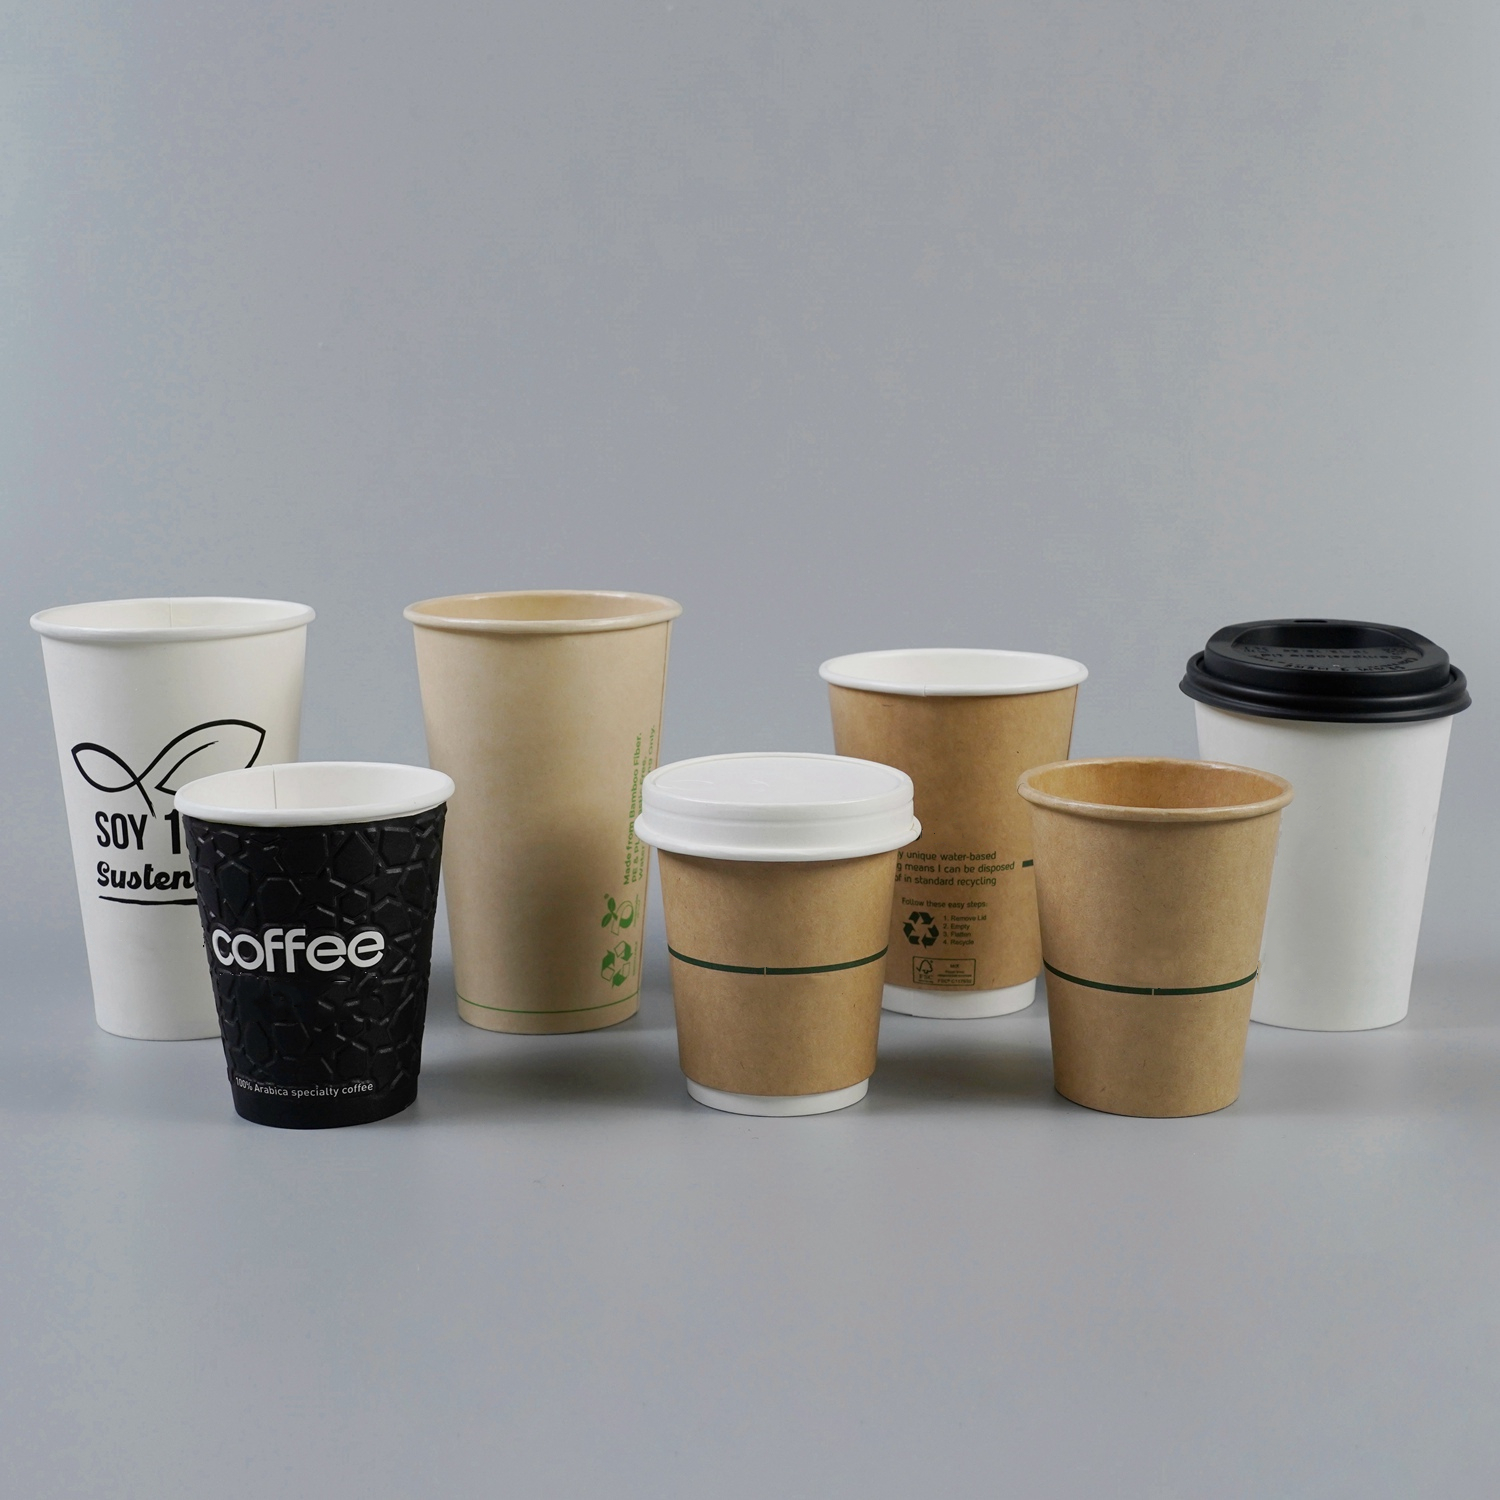 16 oz. Blank Recyclable Paper Cup